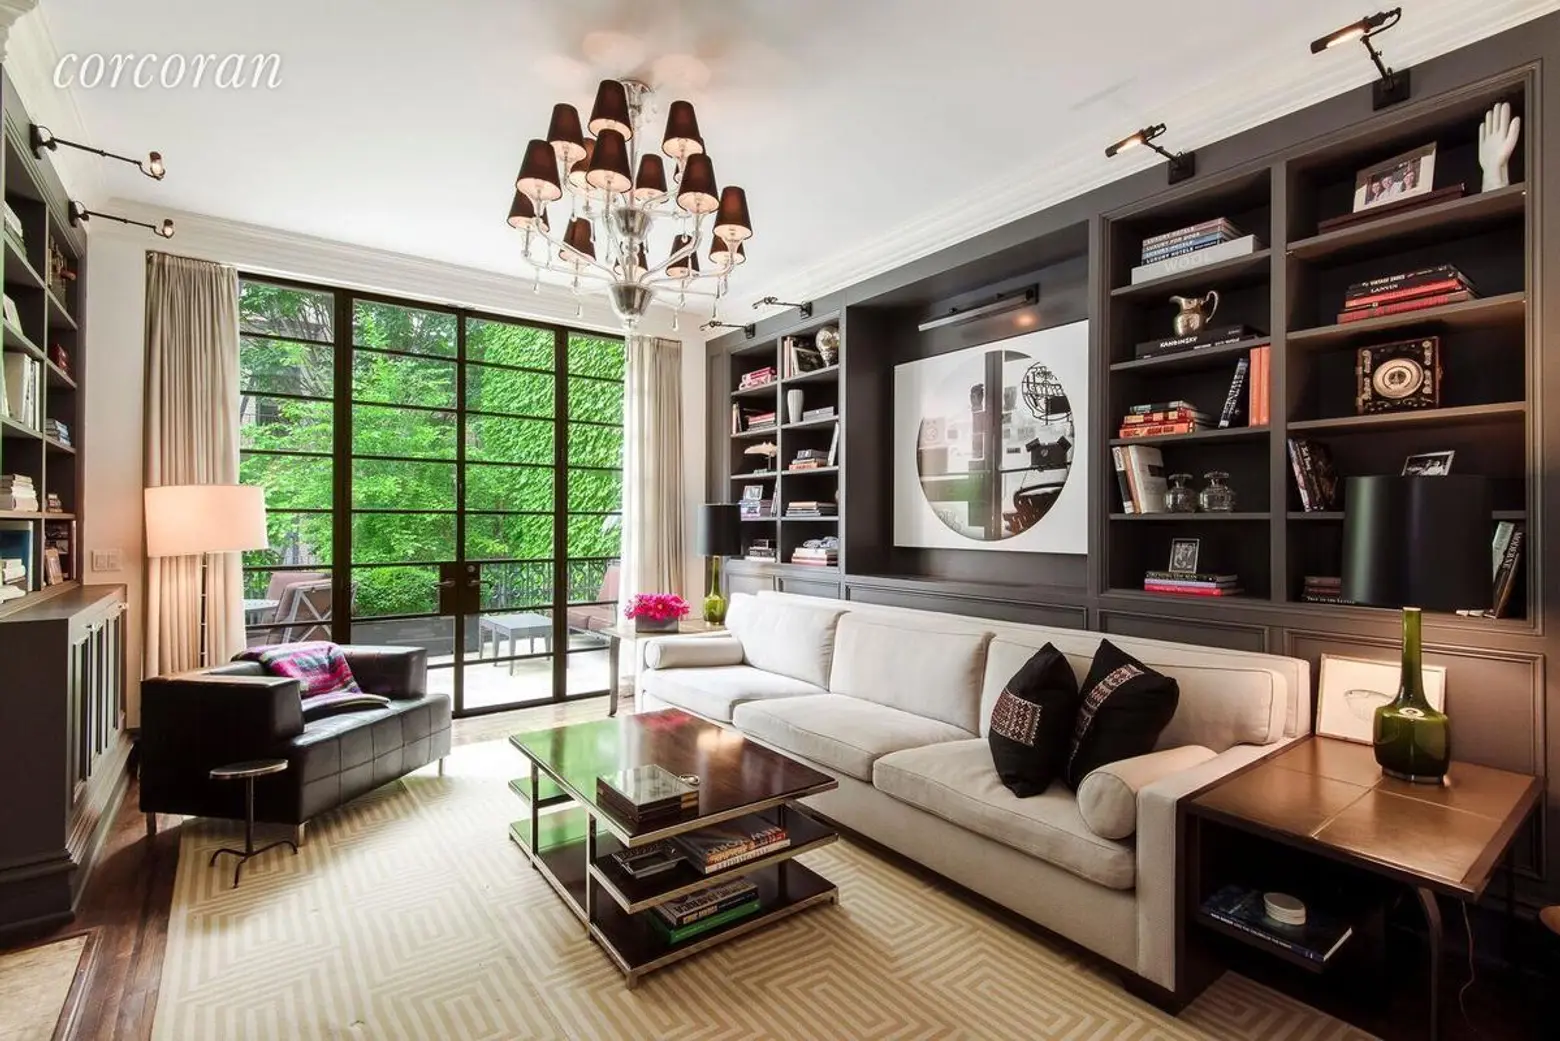 33 Charles Street, West Village, Cool listings, Celebrities, Hilary Swank, Townhouses, outdoor space, interiors